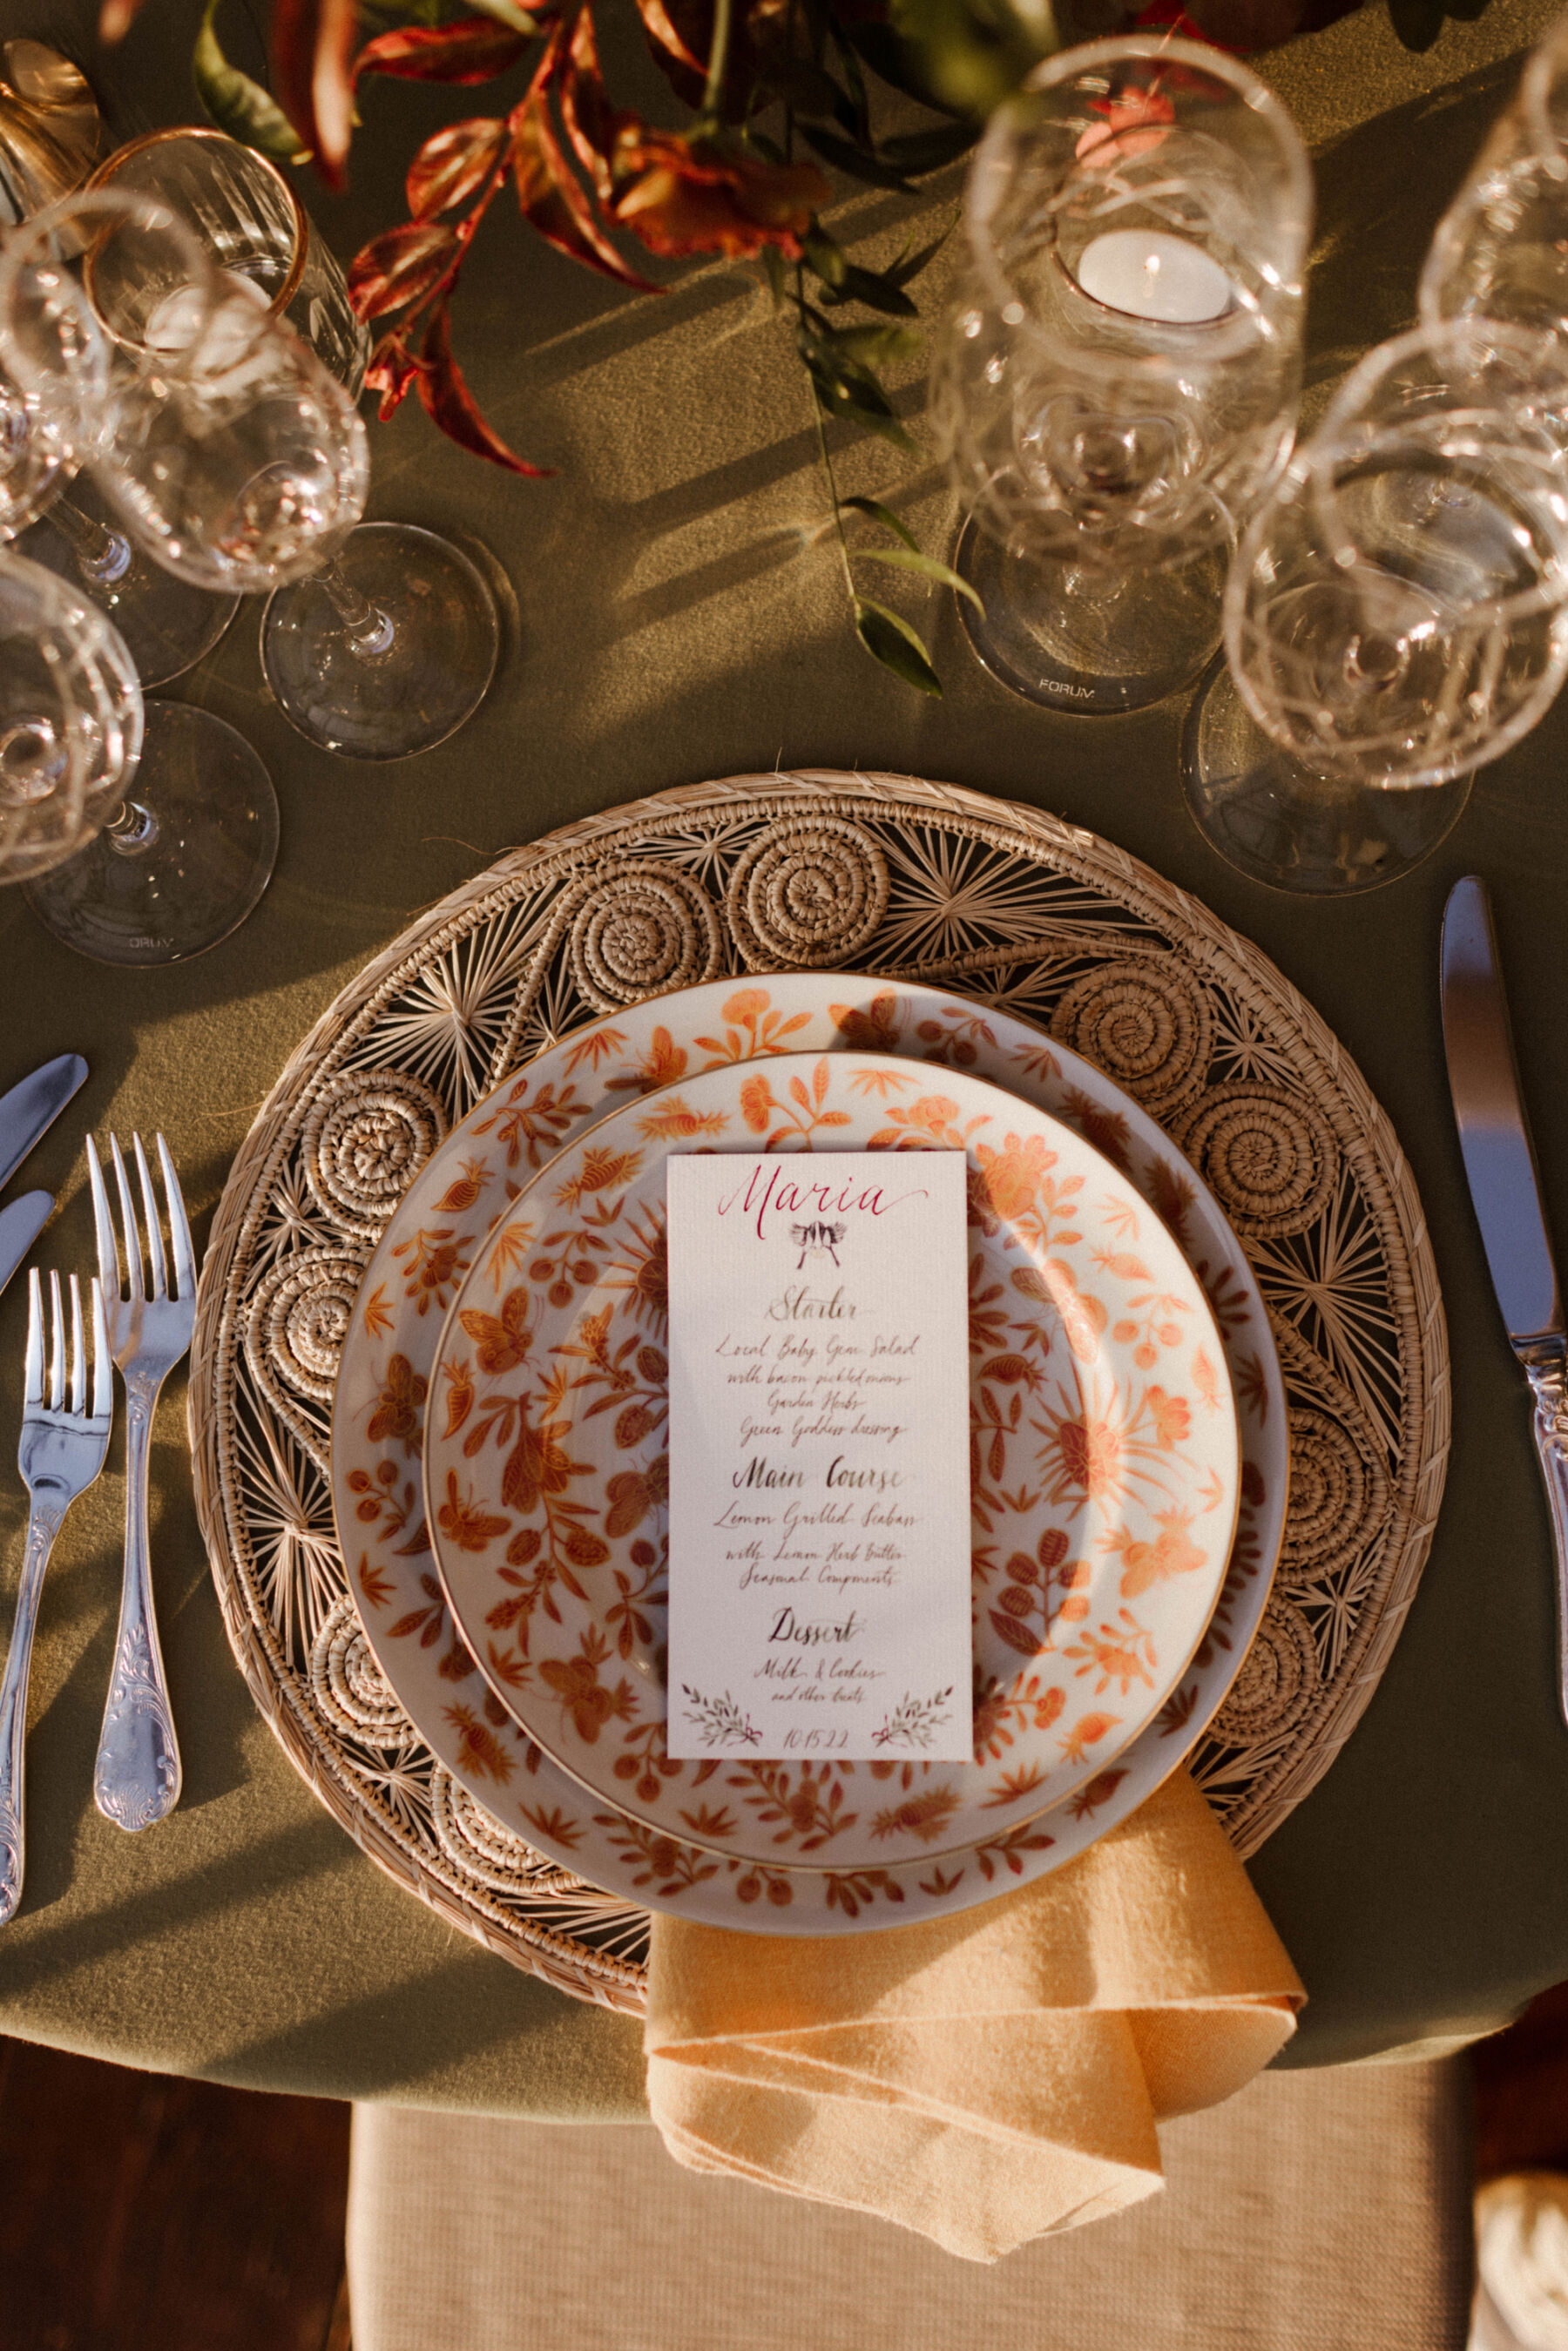 Pretty patterned plates at a wedding reception.